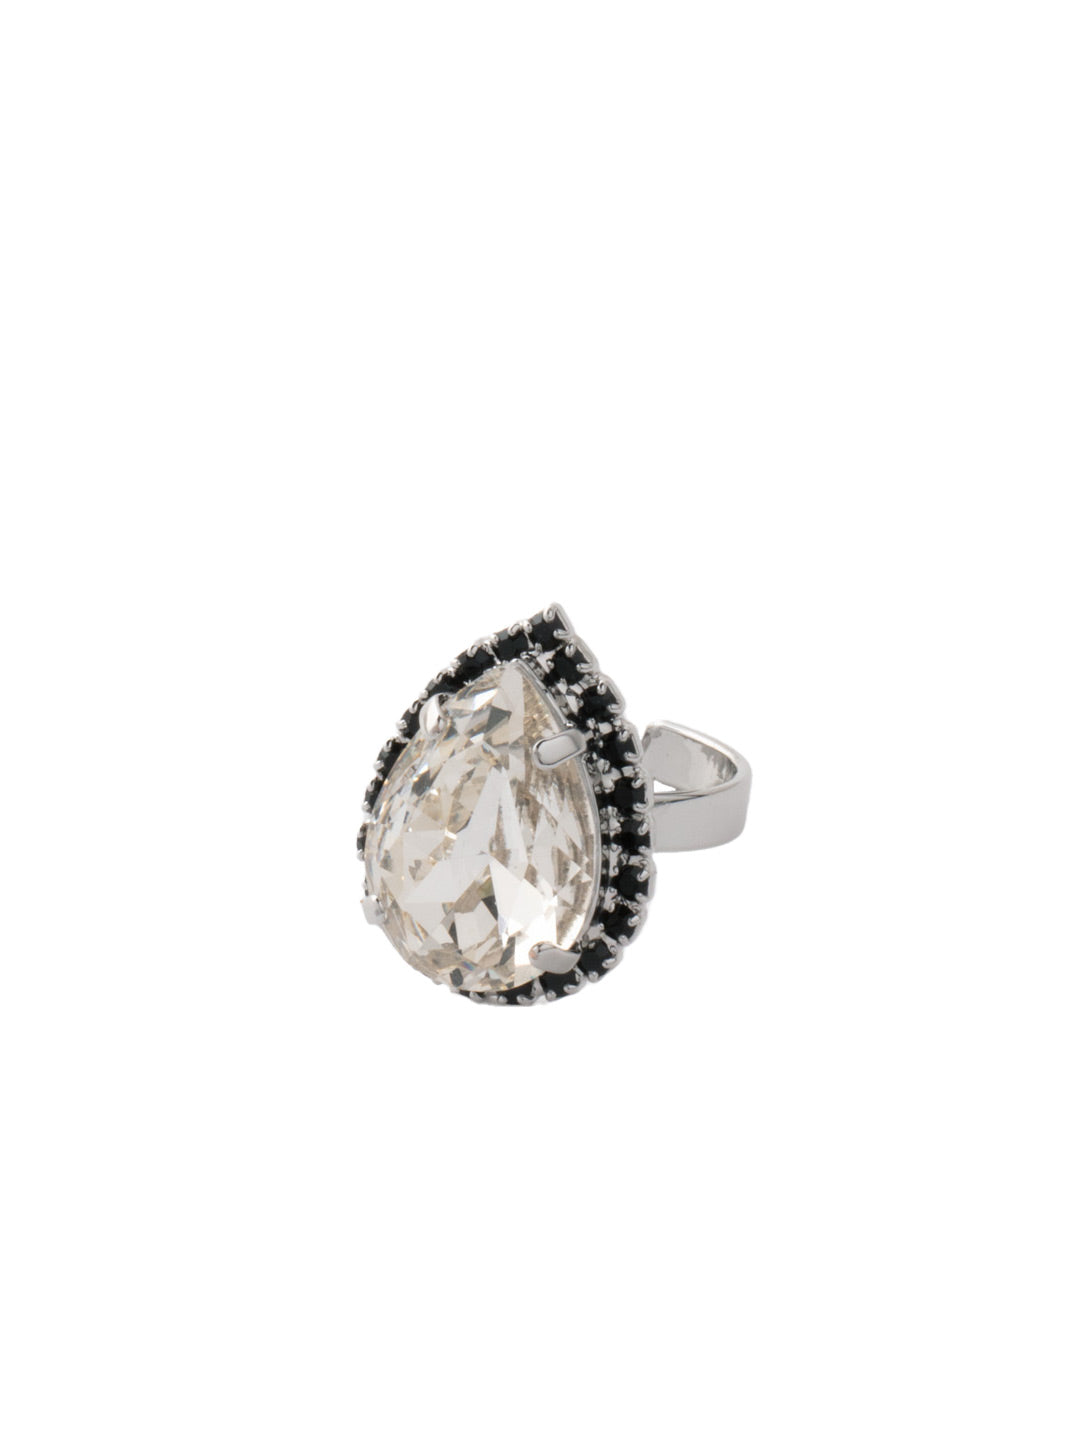 Product Image: Giselle Pear Cocktail Ring